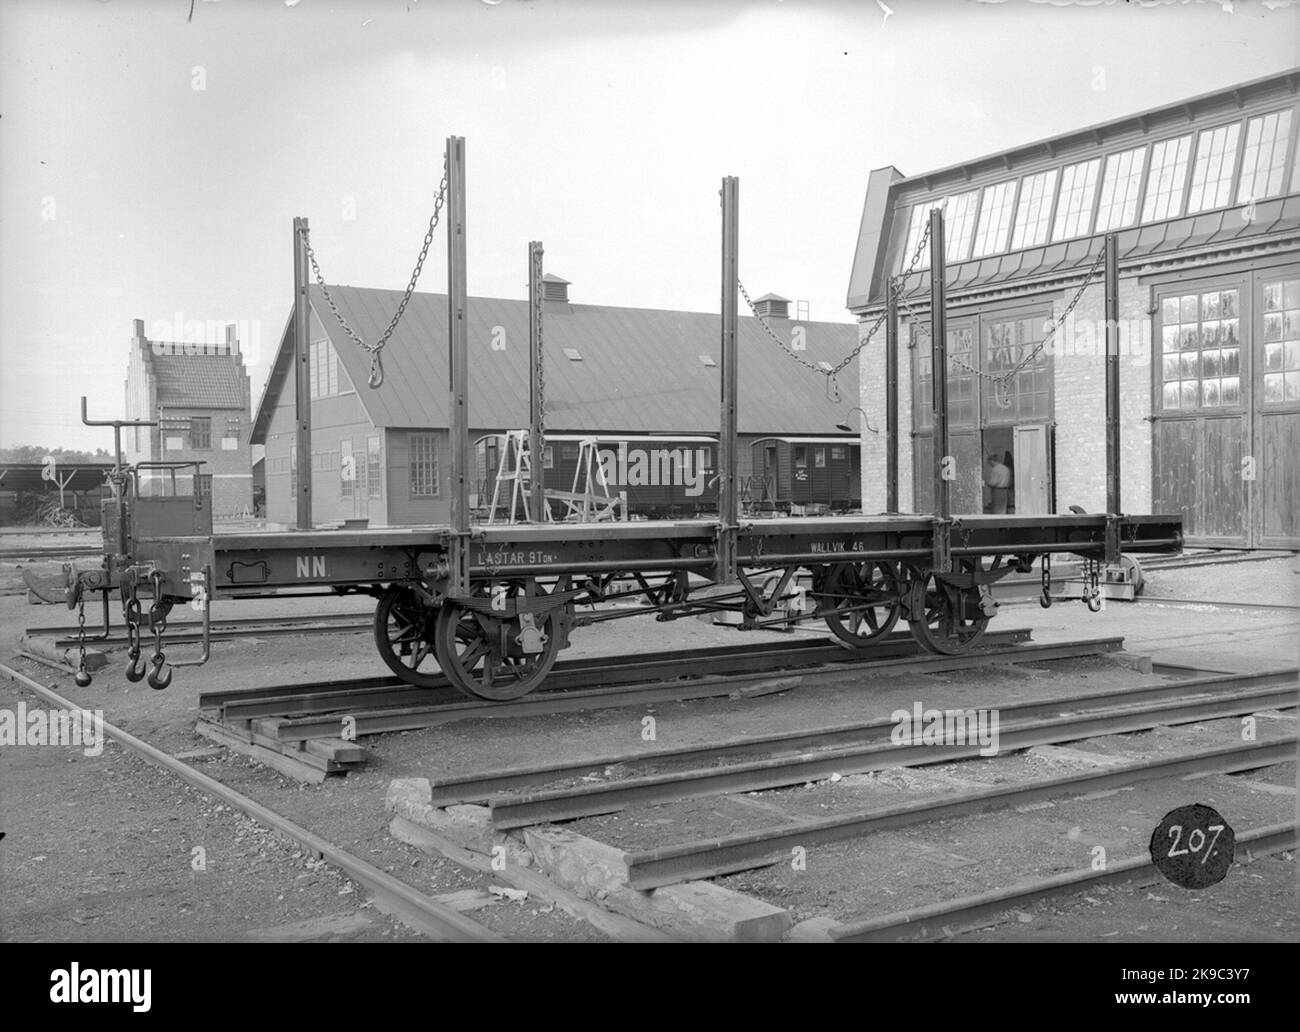 Freight wagon manufactured by the limited company Svenska Railway workshops, ASJ, for Sulfit AB Ljusnan, Vagnlittra NN 46. Stock Photo